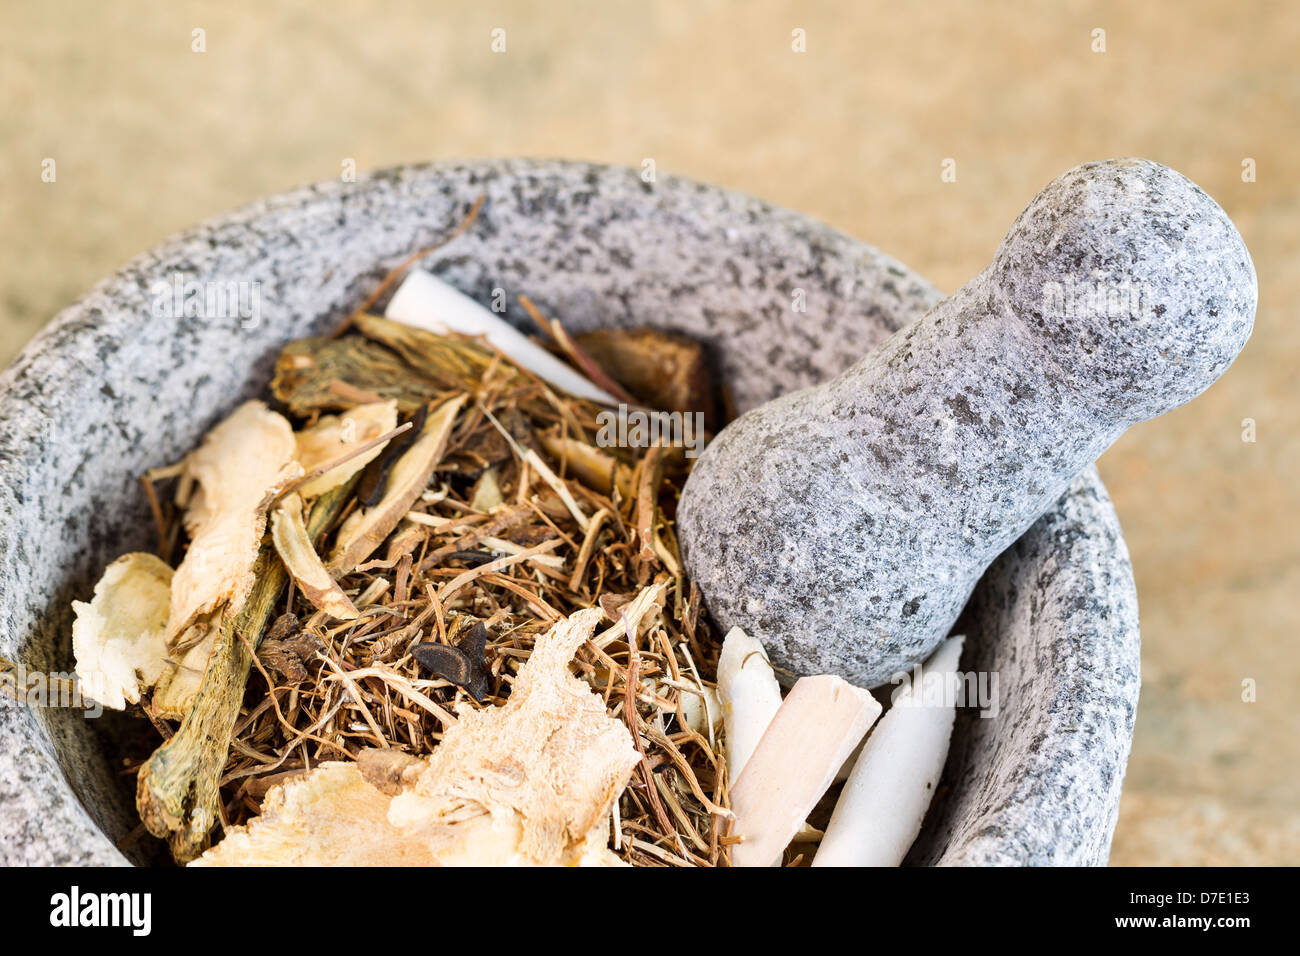 Closeup horizontal photo of a natural stone pestle in stone bowl filled with Chinese herbs used for medicine Stock Photo